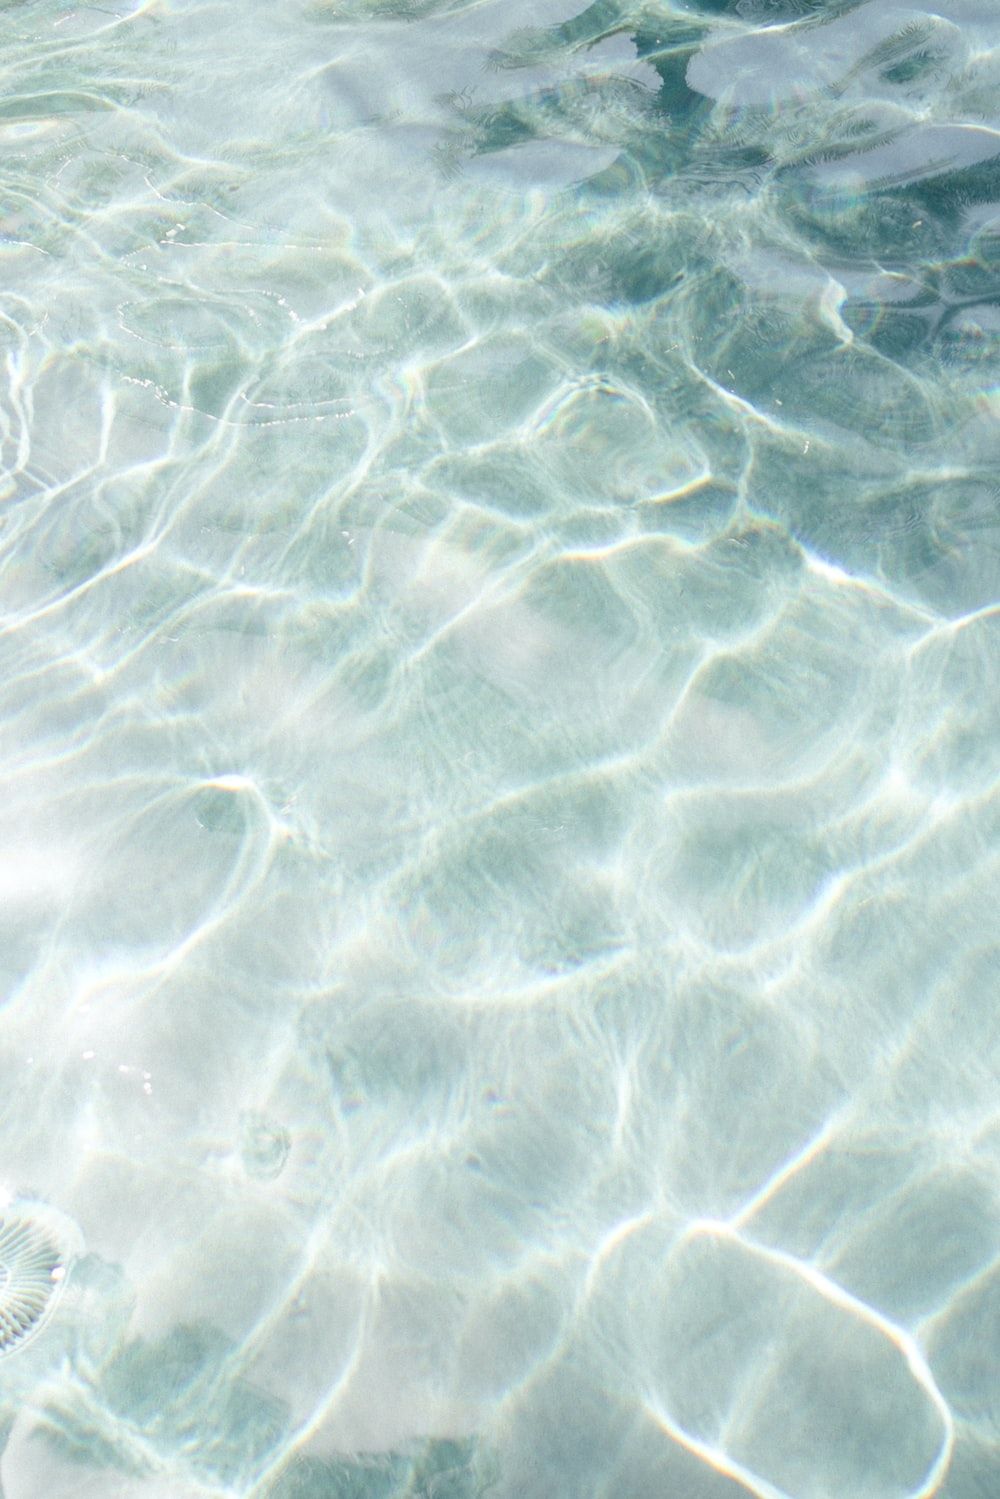 Ocean Texture Picture. Download Free Image